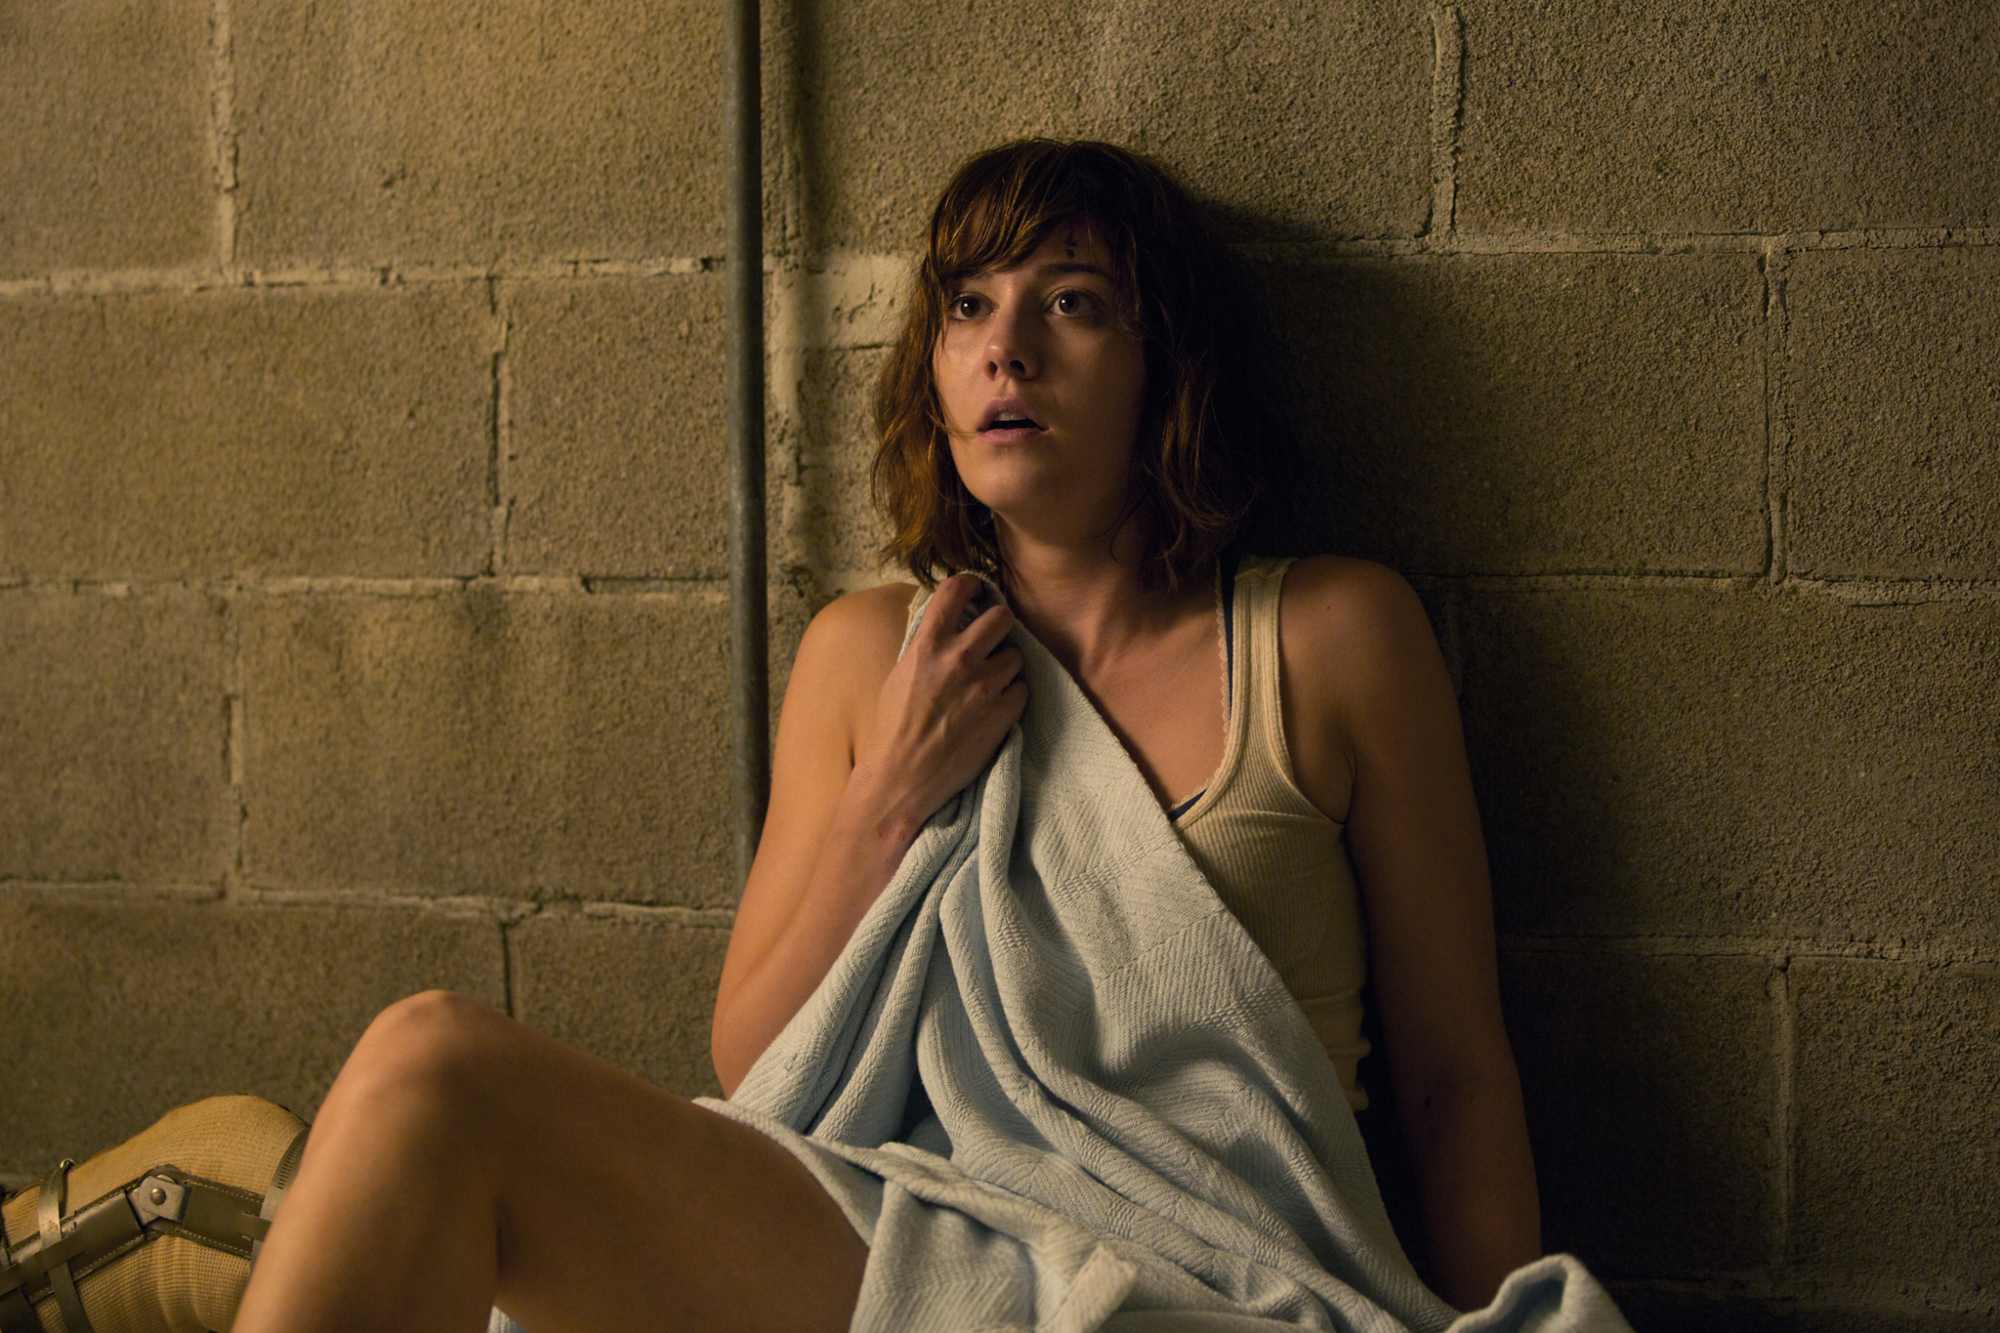 '10 Cloverfield Lane' Mary Elizabeth Winstead as Michelle looking terrified with her back against a wall, holding on to a blanket.